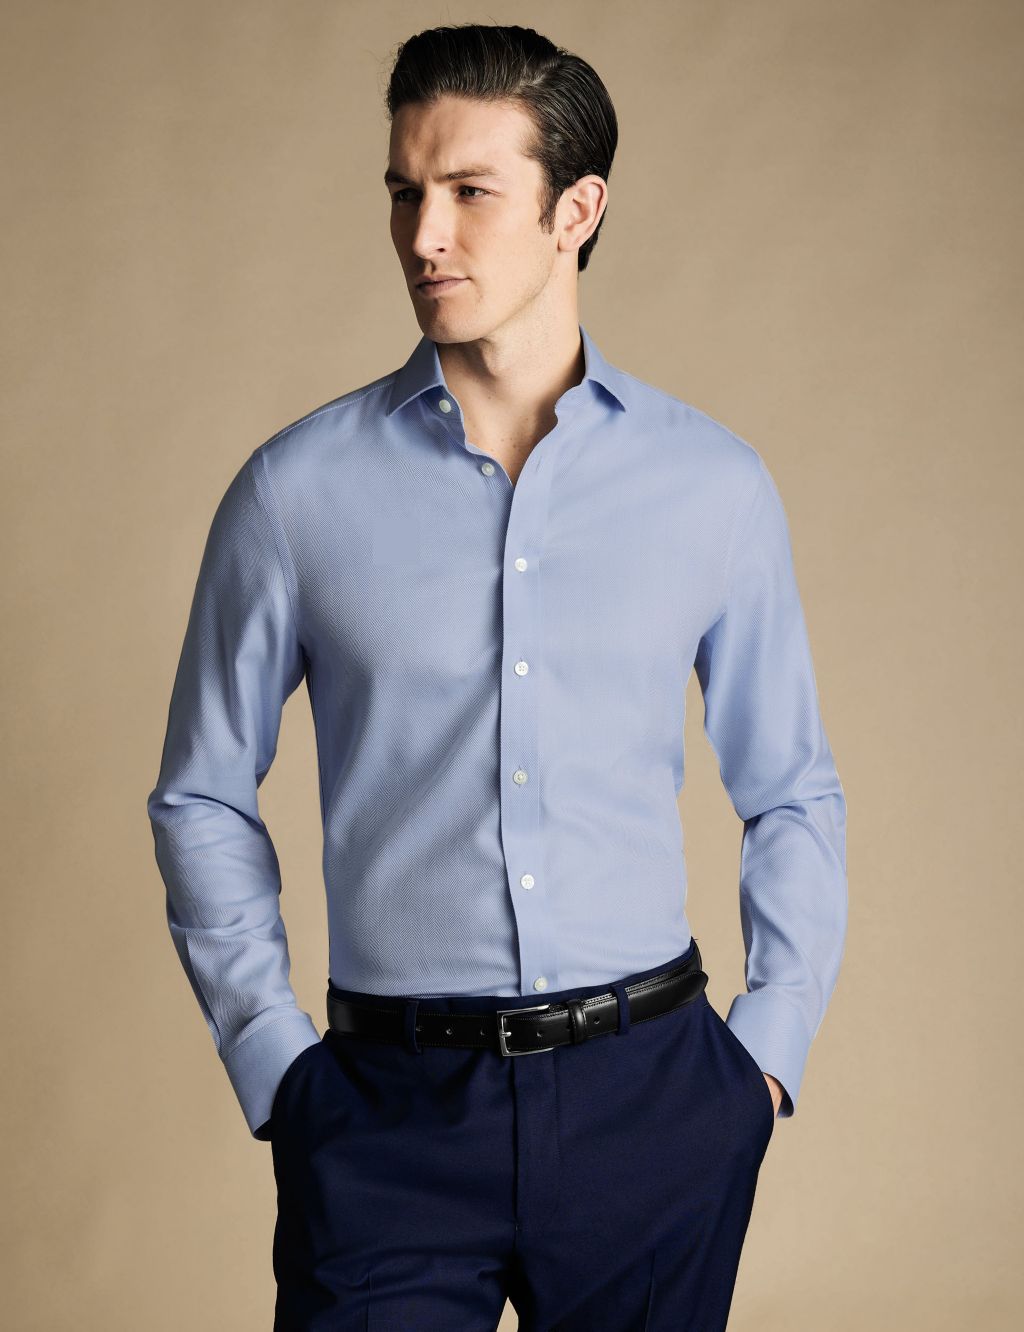 Men's Double Cuff Formal Shirts | M&S